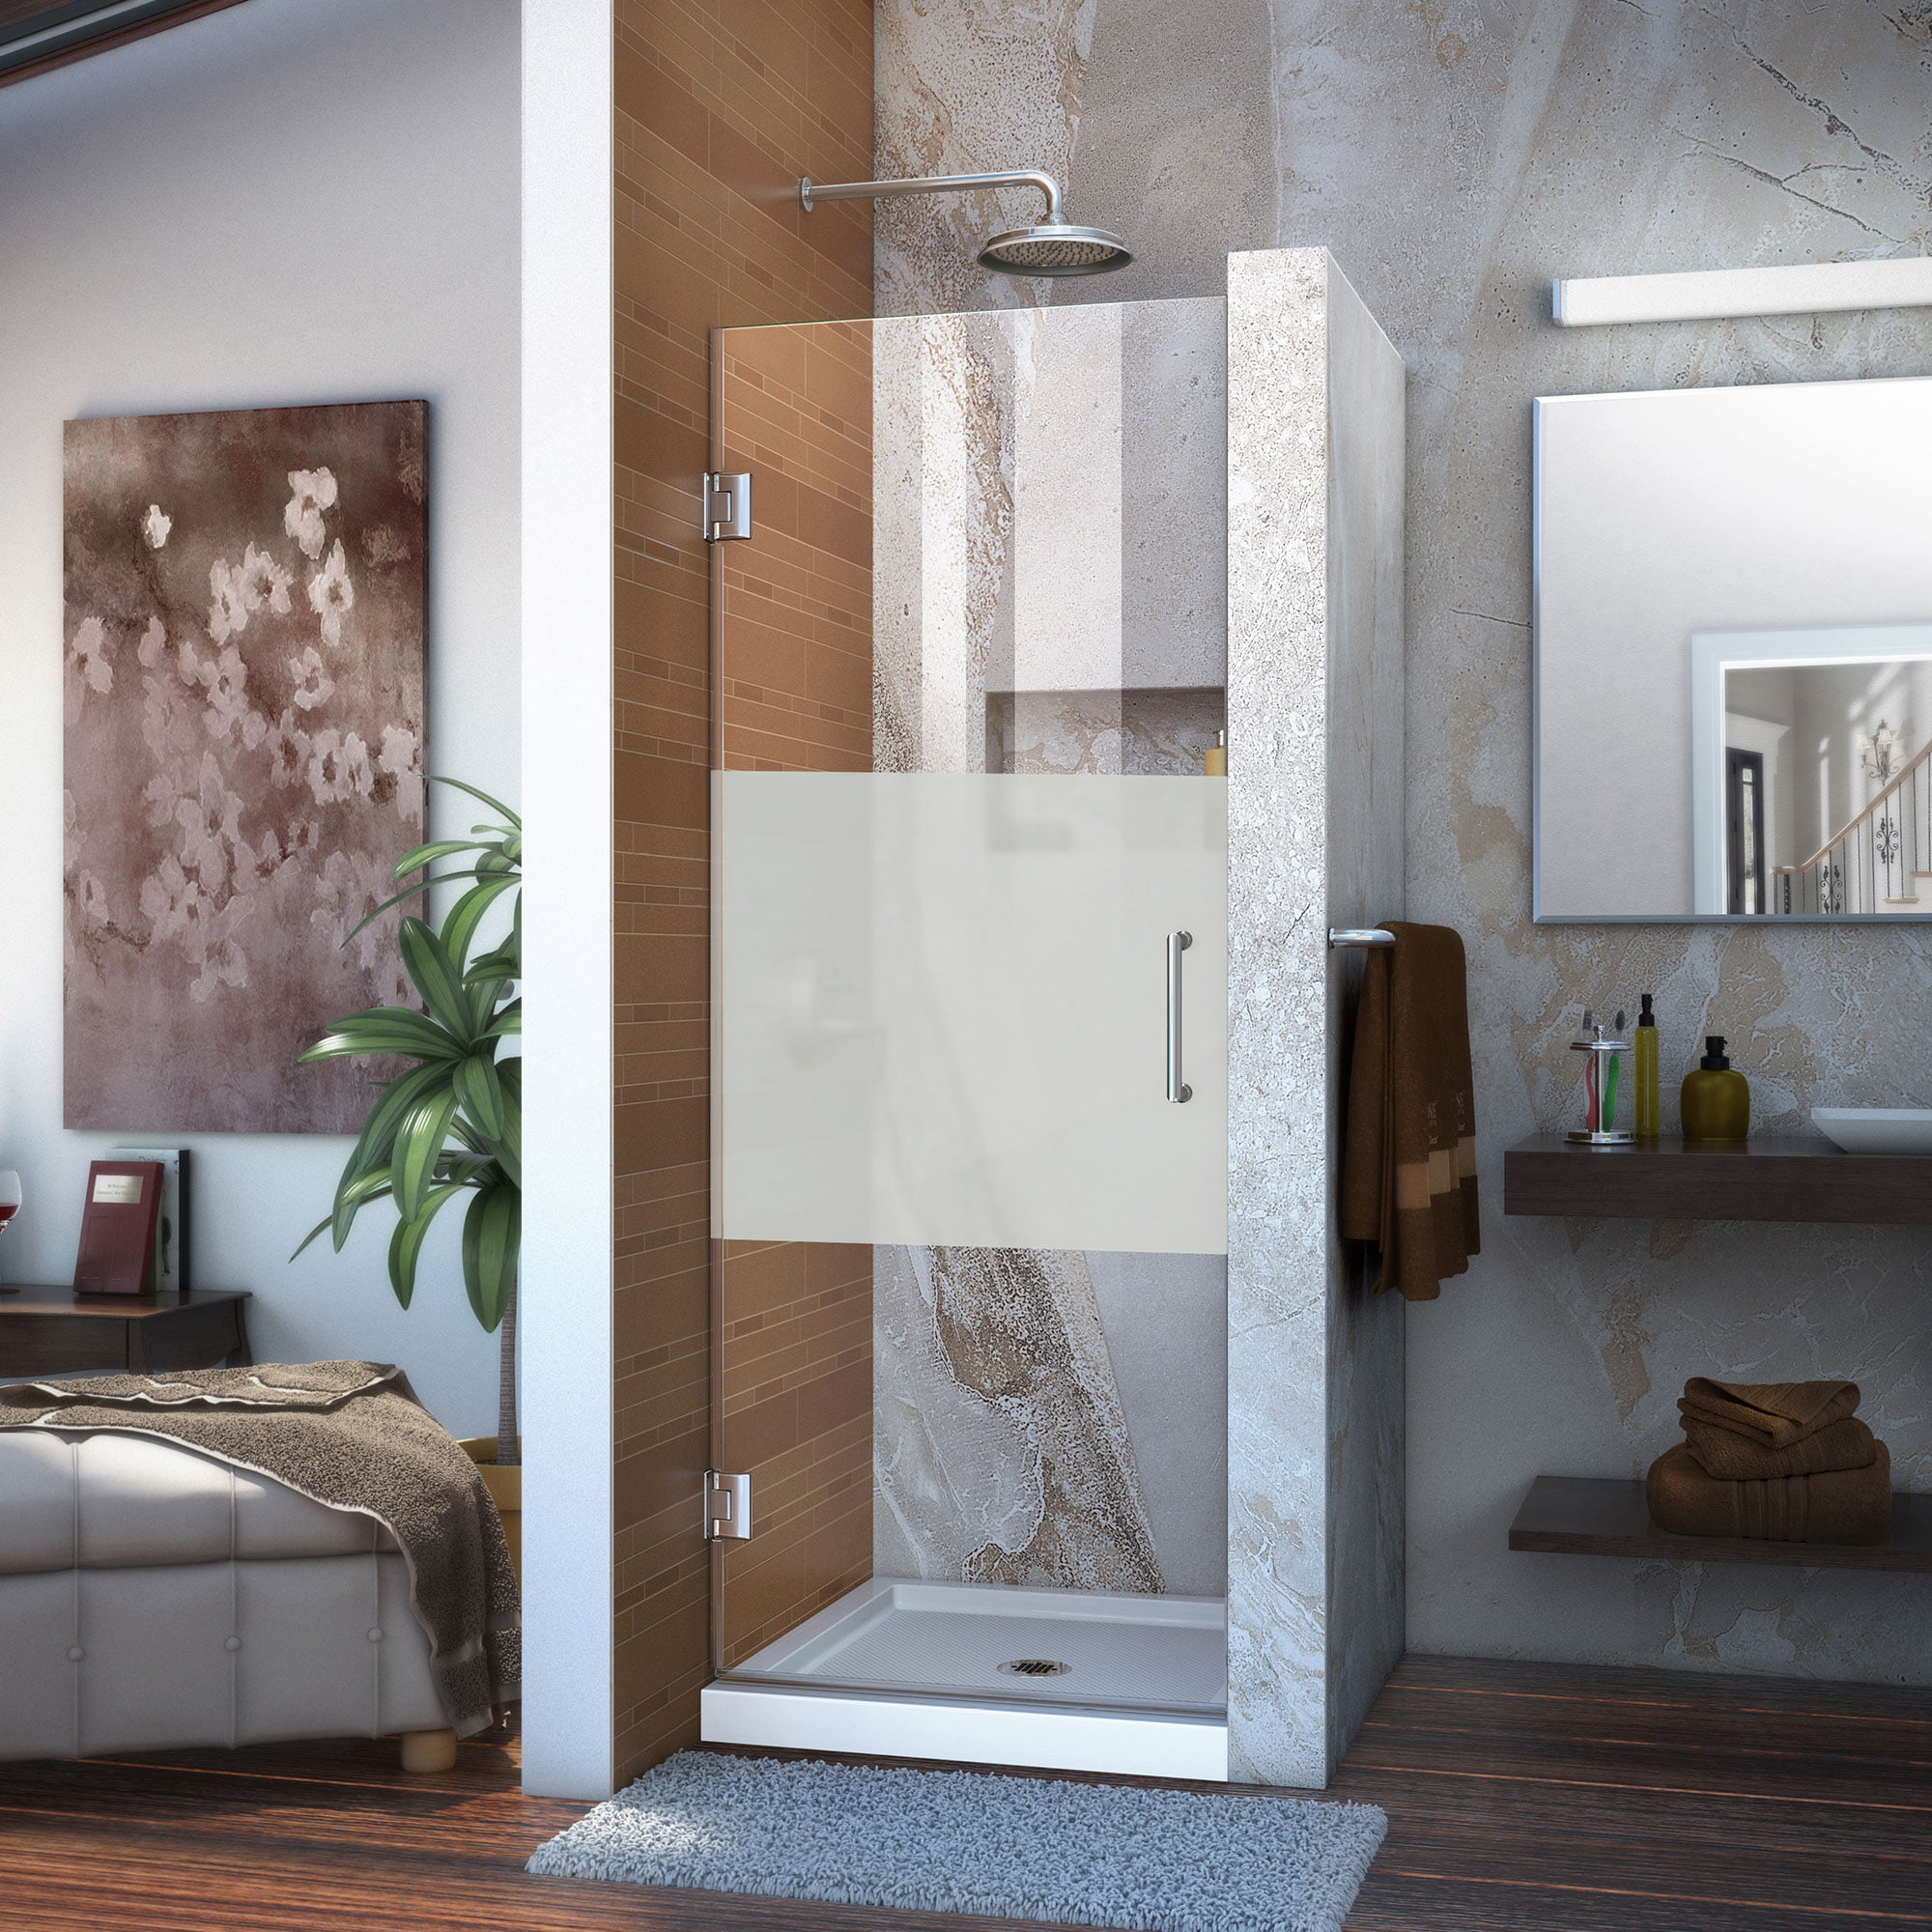 DreamLine Unidoor 29 in. W x 72 in. H Frameless Hinged Shower Door, Frosted Band Glass, in Chrome